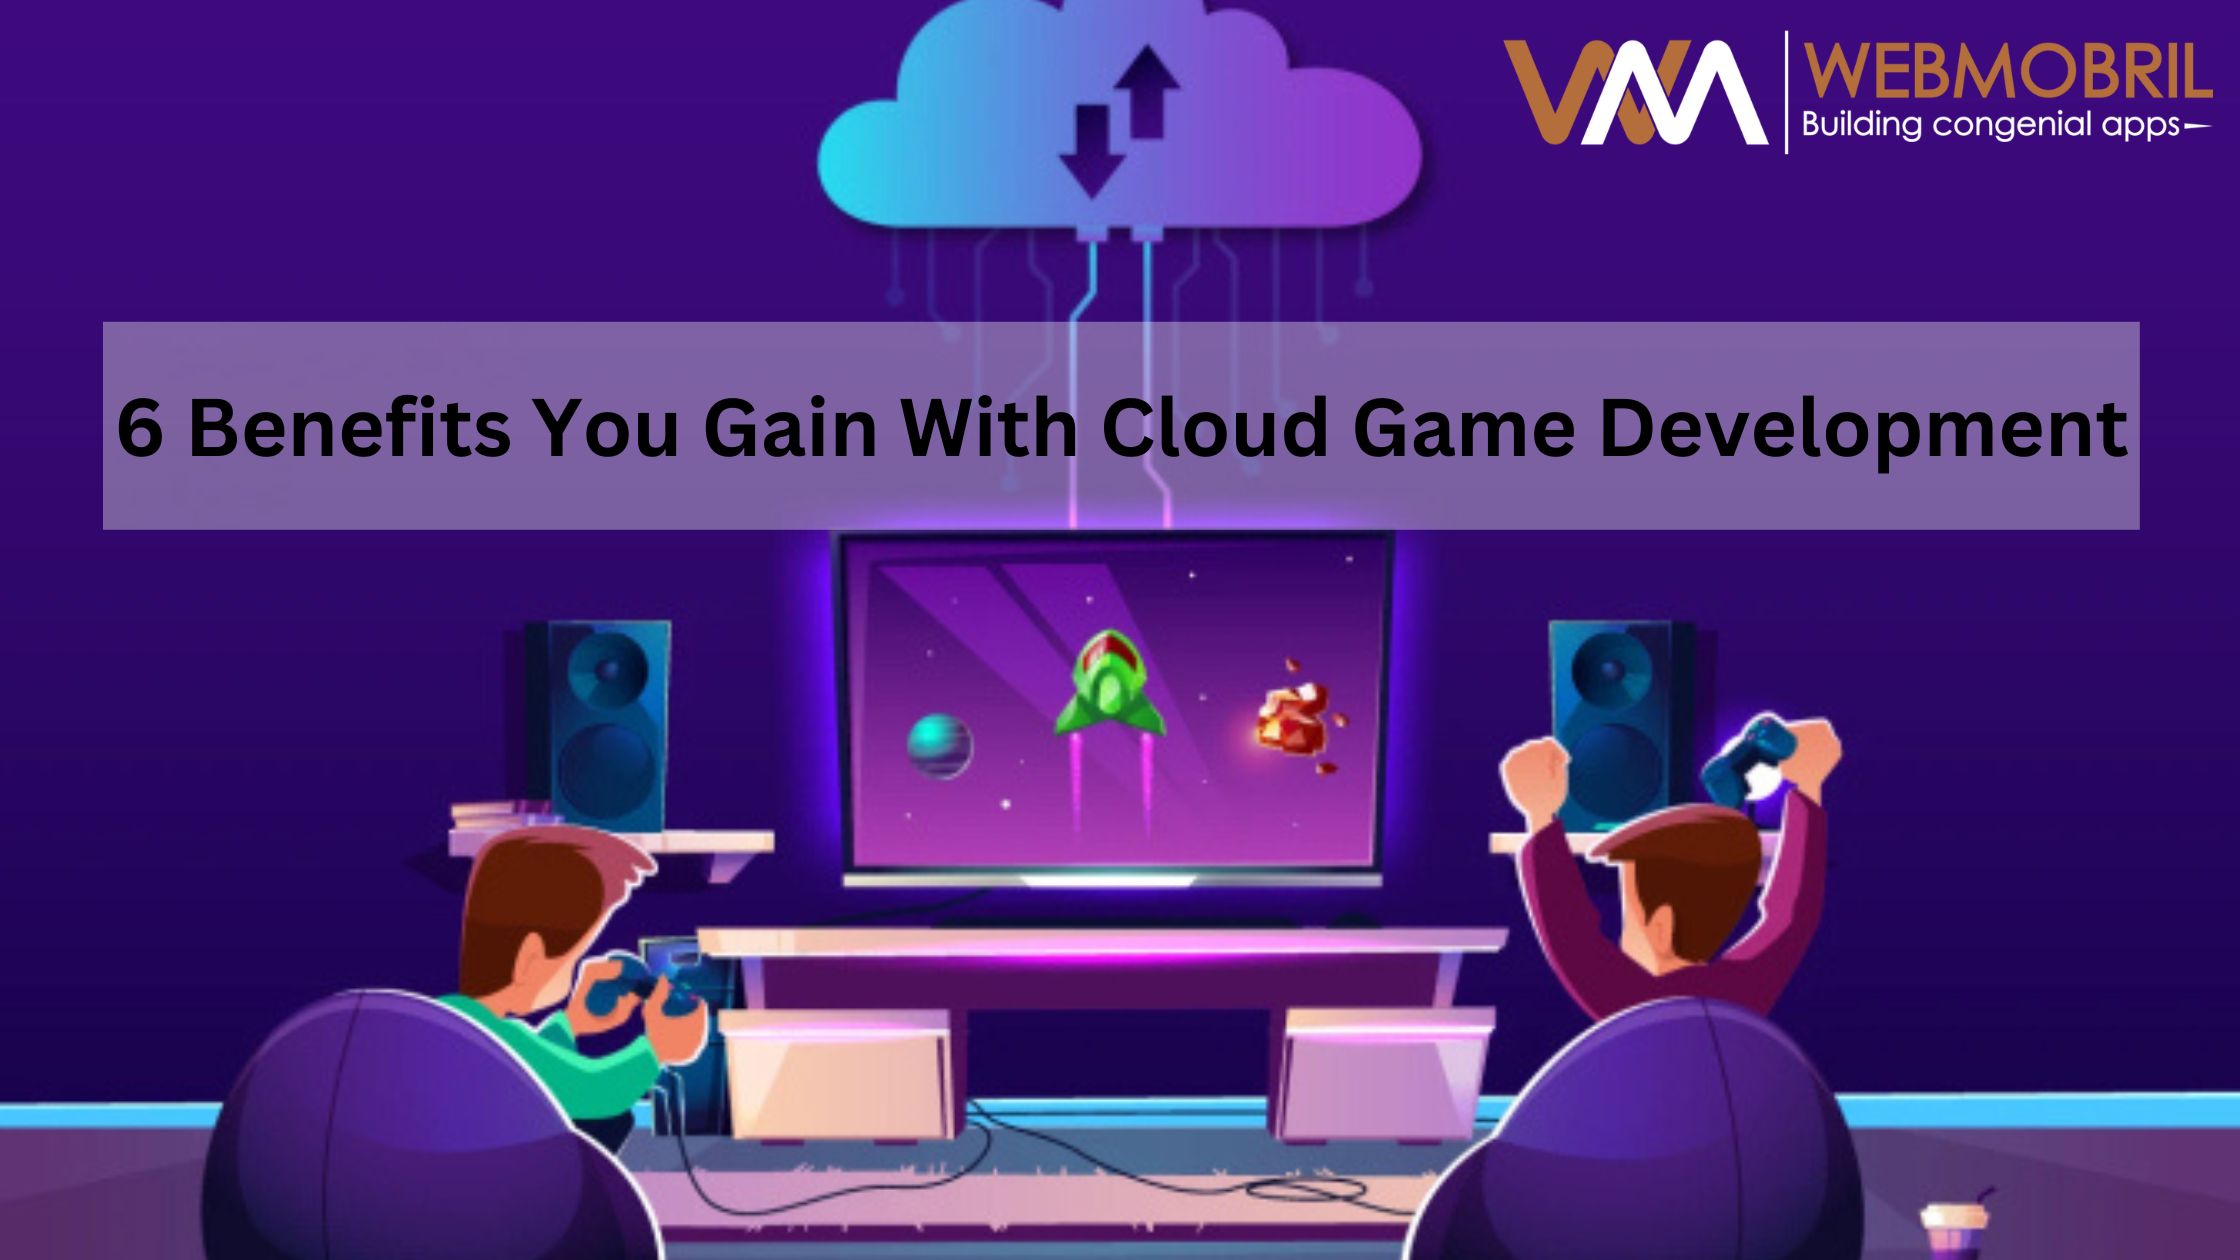 6 Benefits You Gain With Cloud Game Development